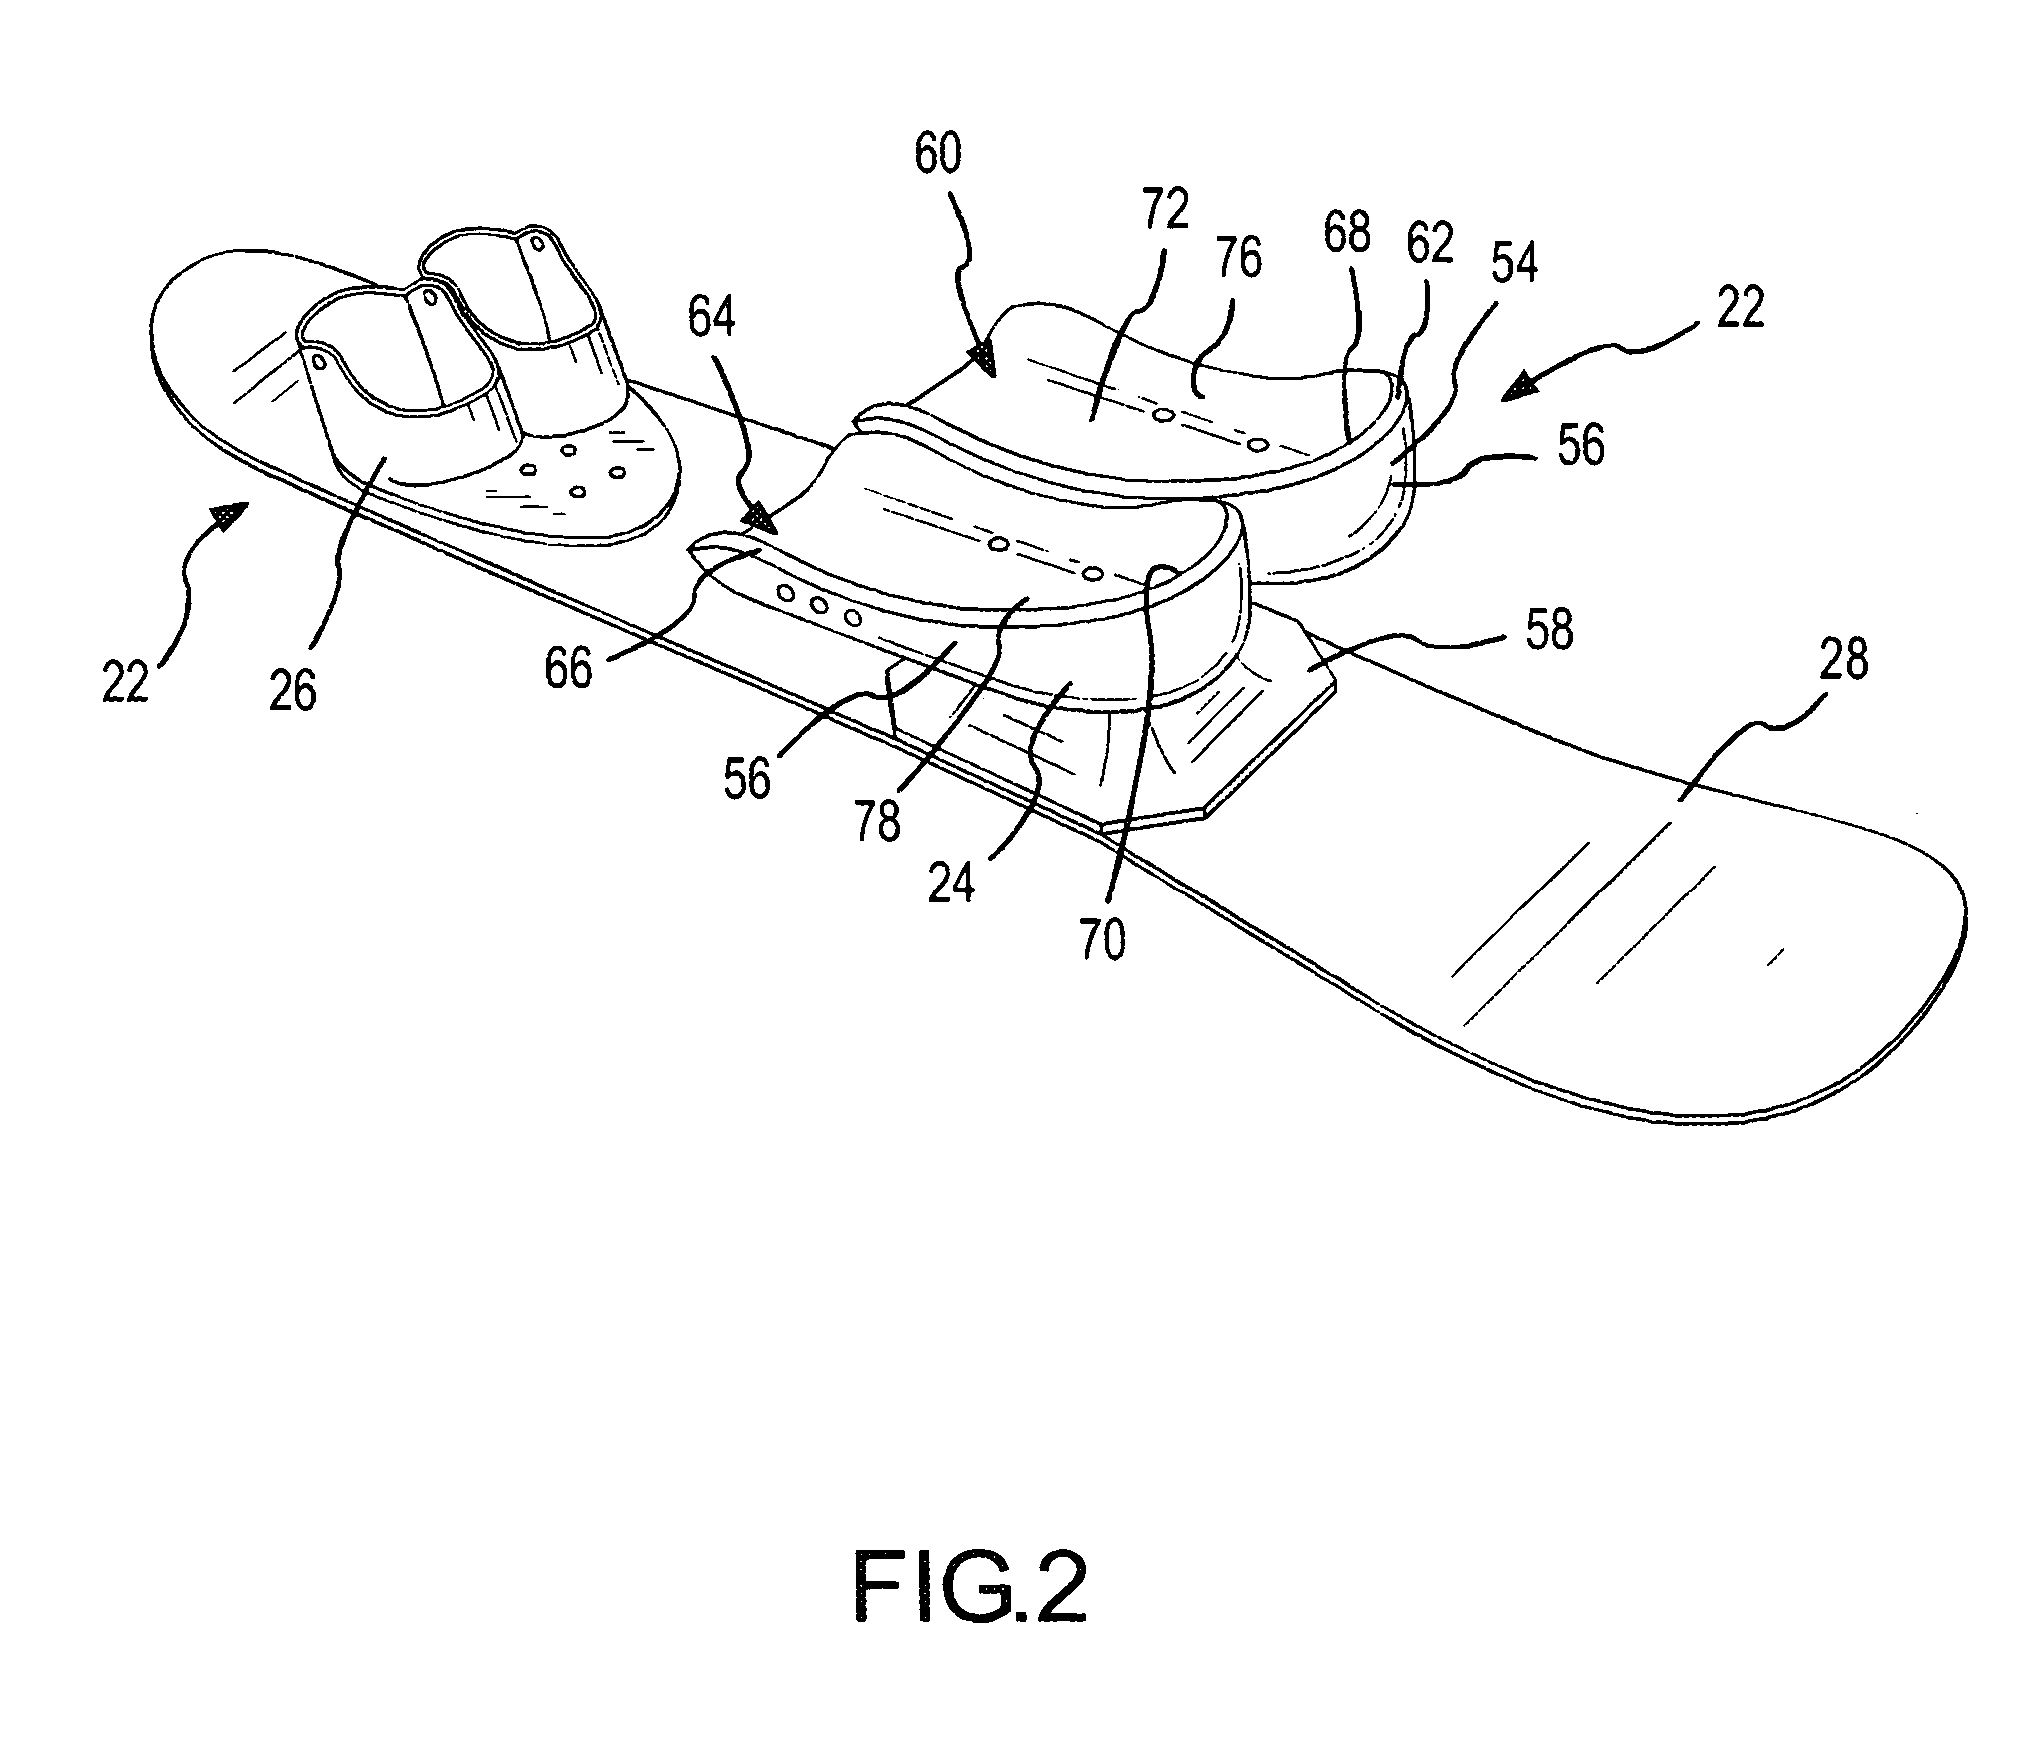 Kneeboard device and method of attaching a person to a snowboard deck